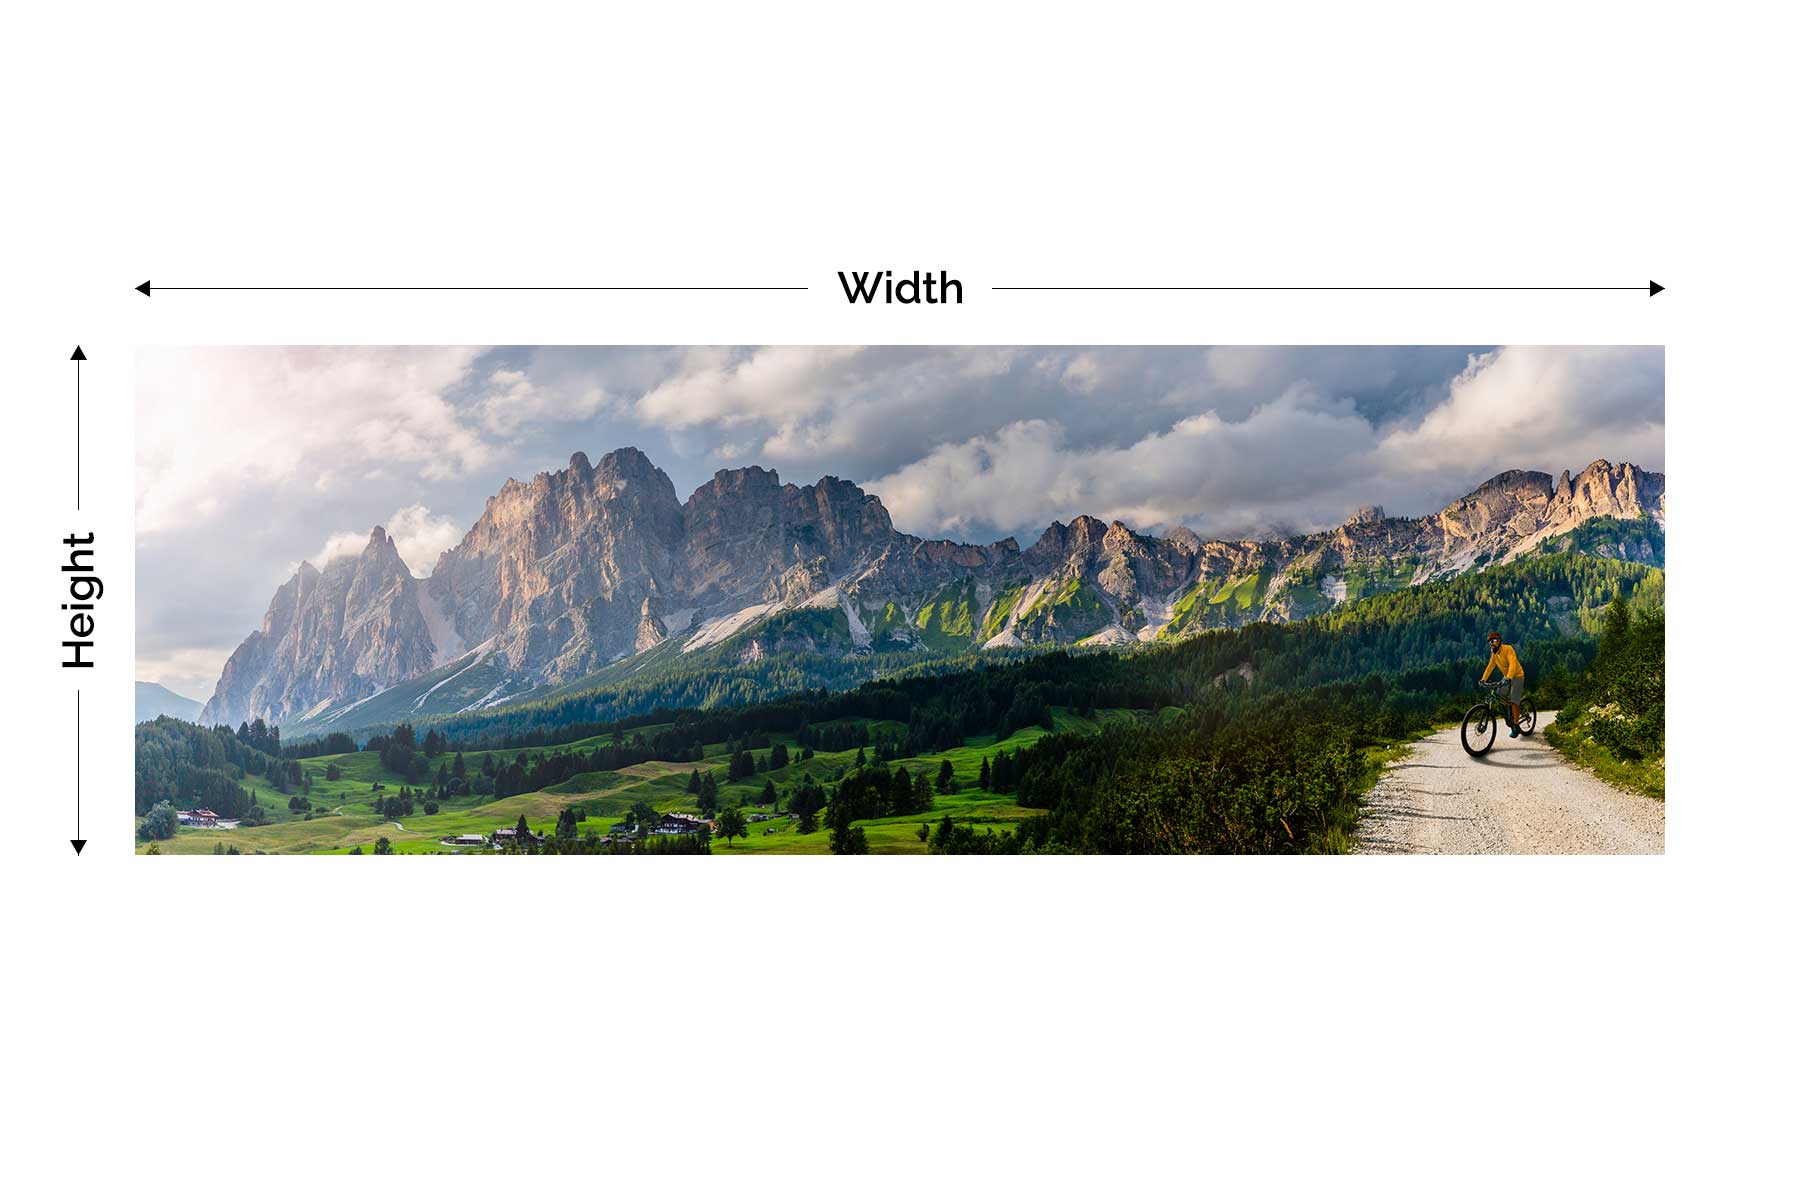 Get the pixel width and height dimensions from image